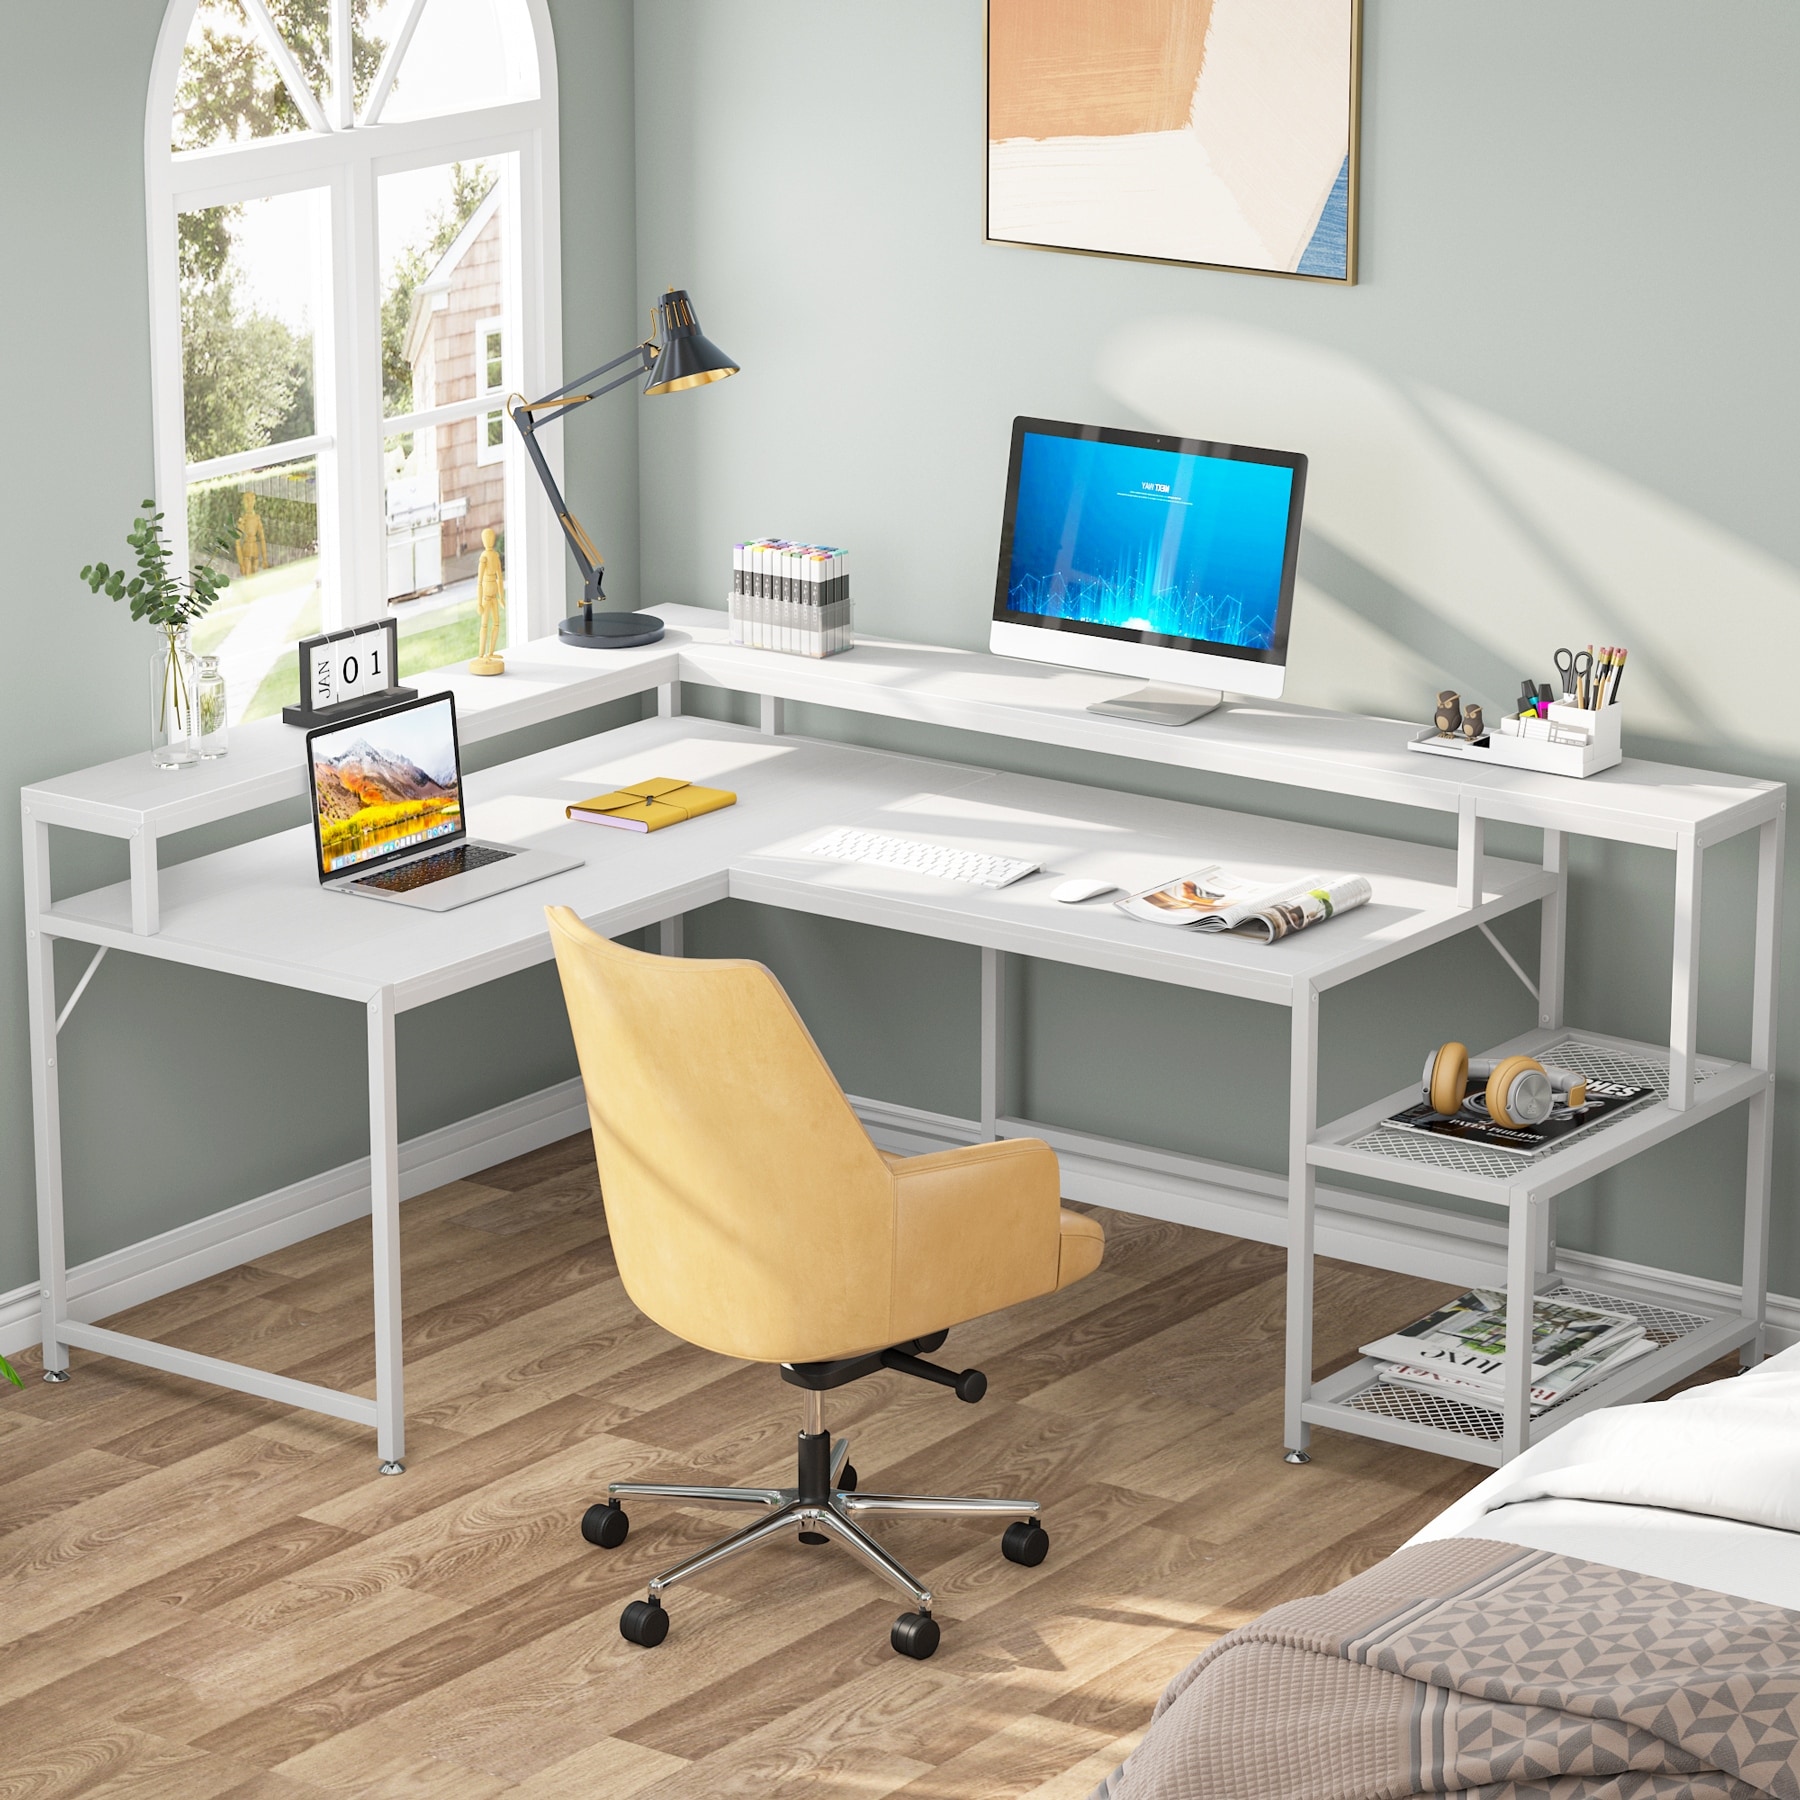 https://ak1.ostkcdn.com/images/products/is/images/direct/ac0324cf7338fa207949fa8627c653f906879133/L-Shaped-Desk-with-Monitor-Stand%2C-69-Inch-Large-Reversible-Corner-Desk-with-Storage-Shelf.jpg